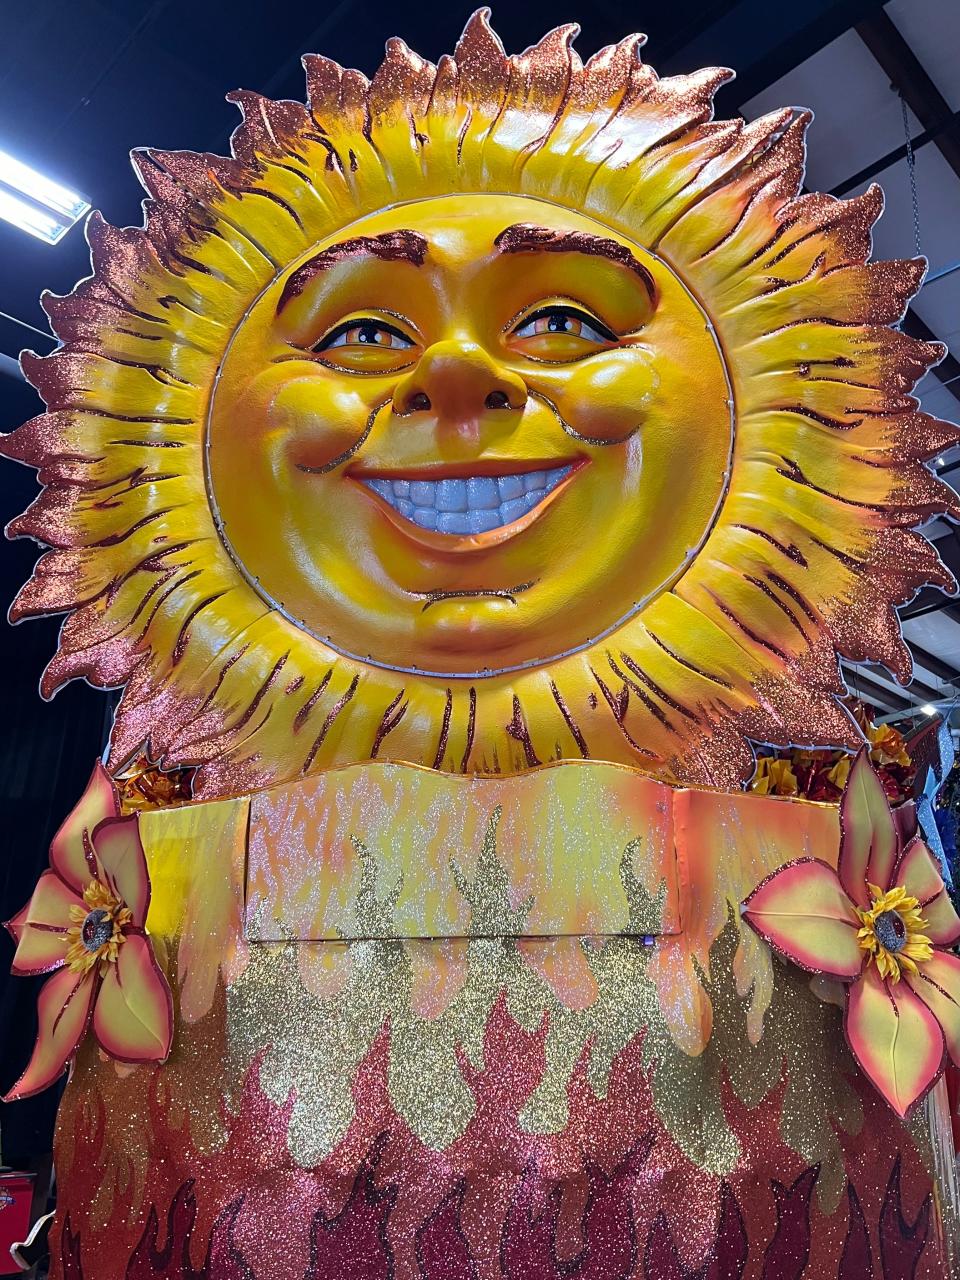 This is one of six new floats for 2024's elements themed parade. After Mardi Gras is over, all the large props from the themed floats will return to Kern Studios, where they can be repurposed in other parades. The floats themselves will be stripped and reskinned with blank canvases for the following year.